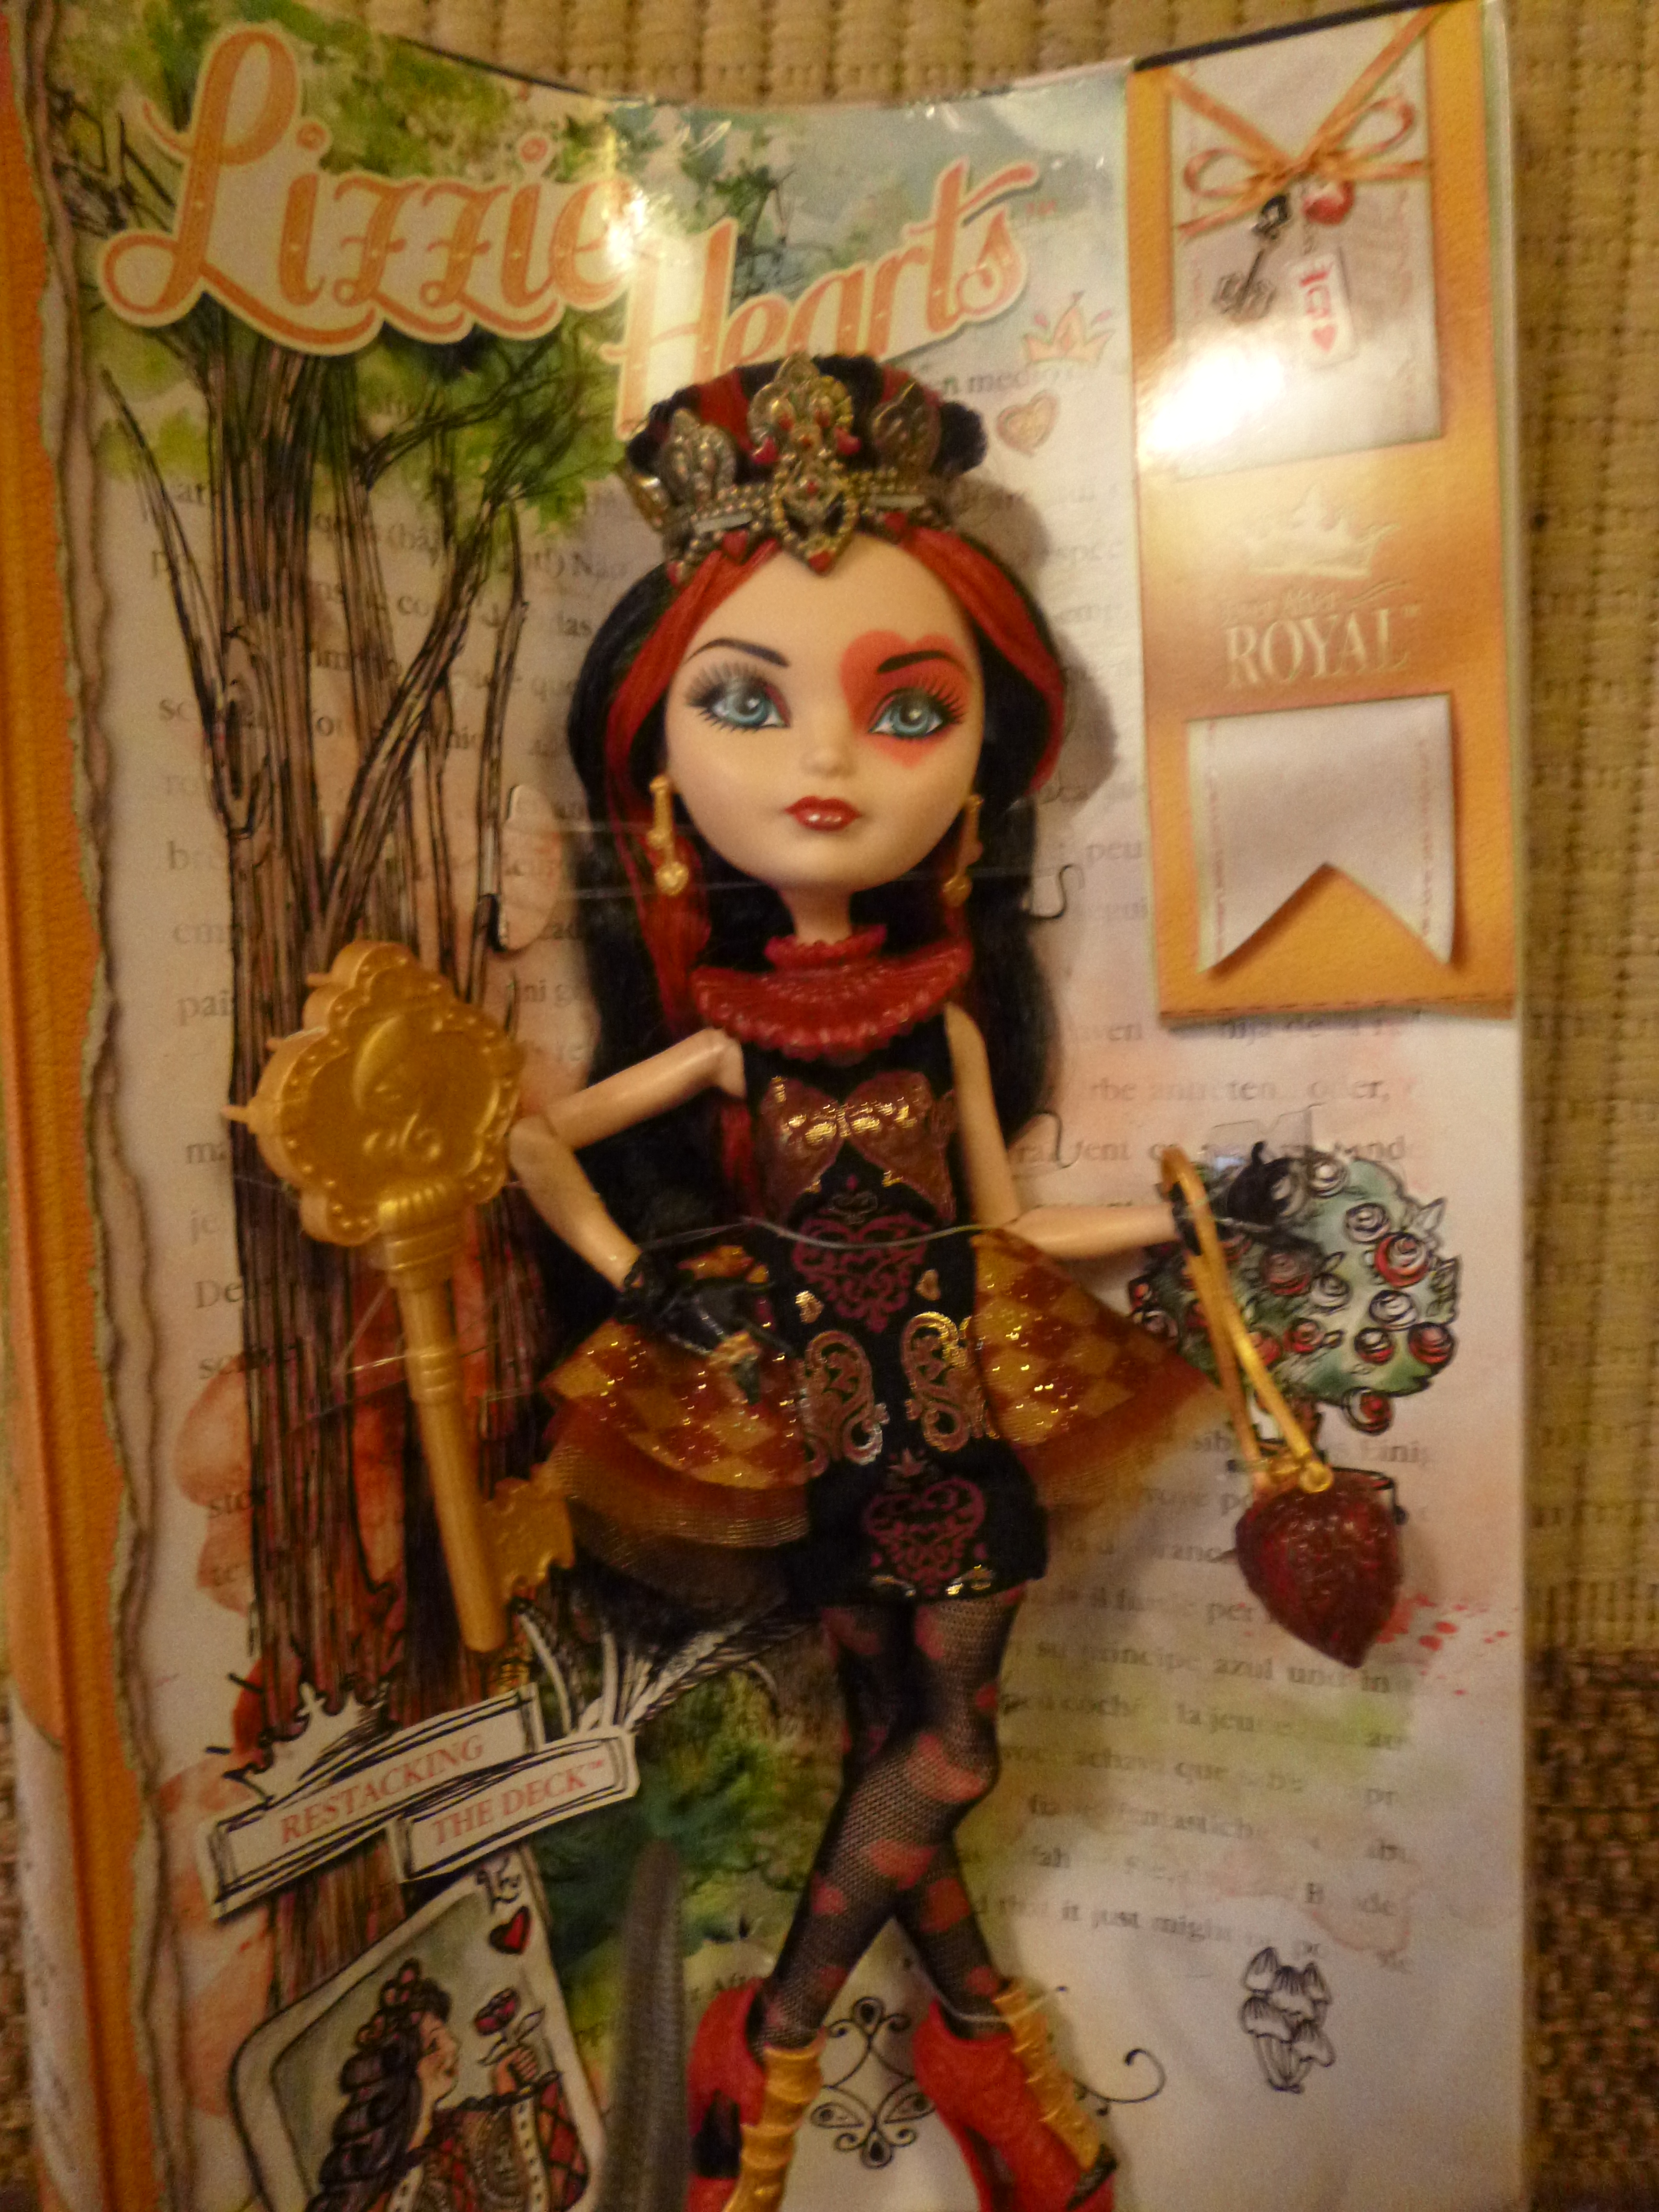 Lizzie Hearts Comparison Review Ever After High 